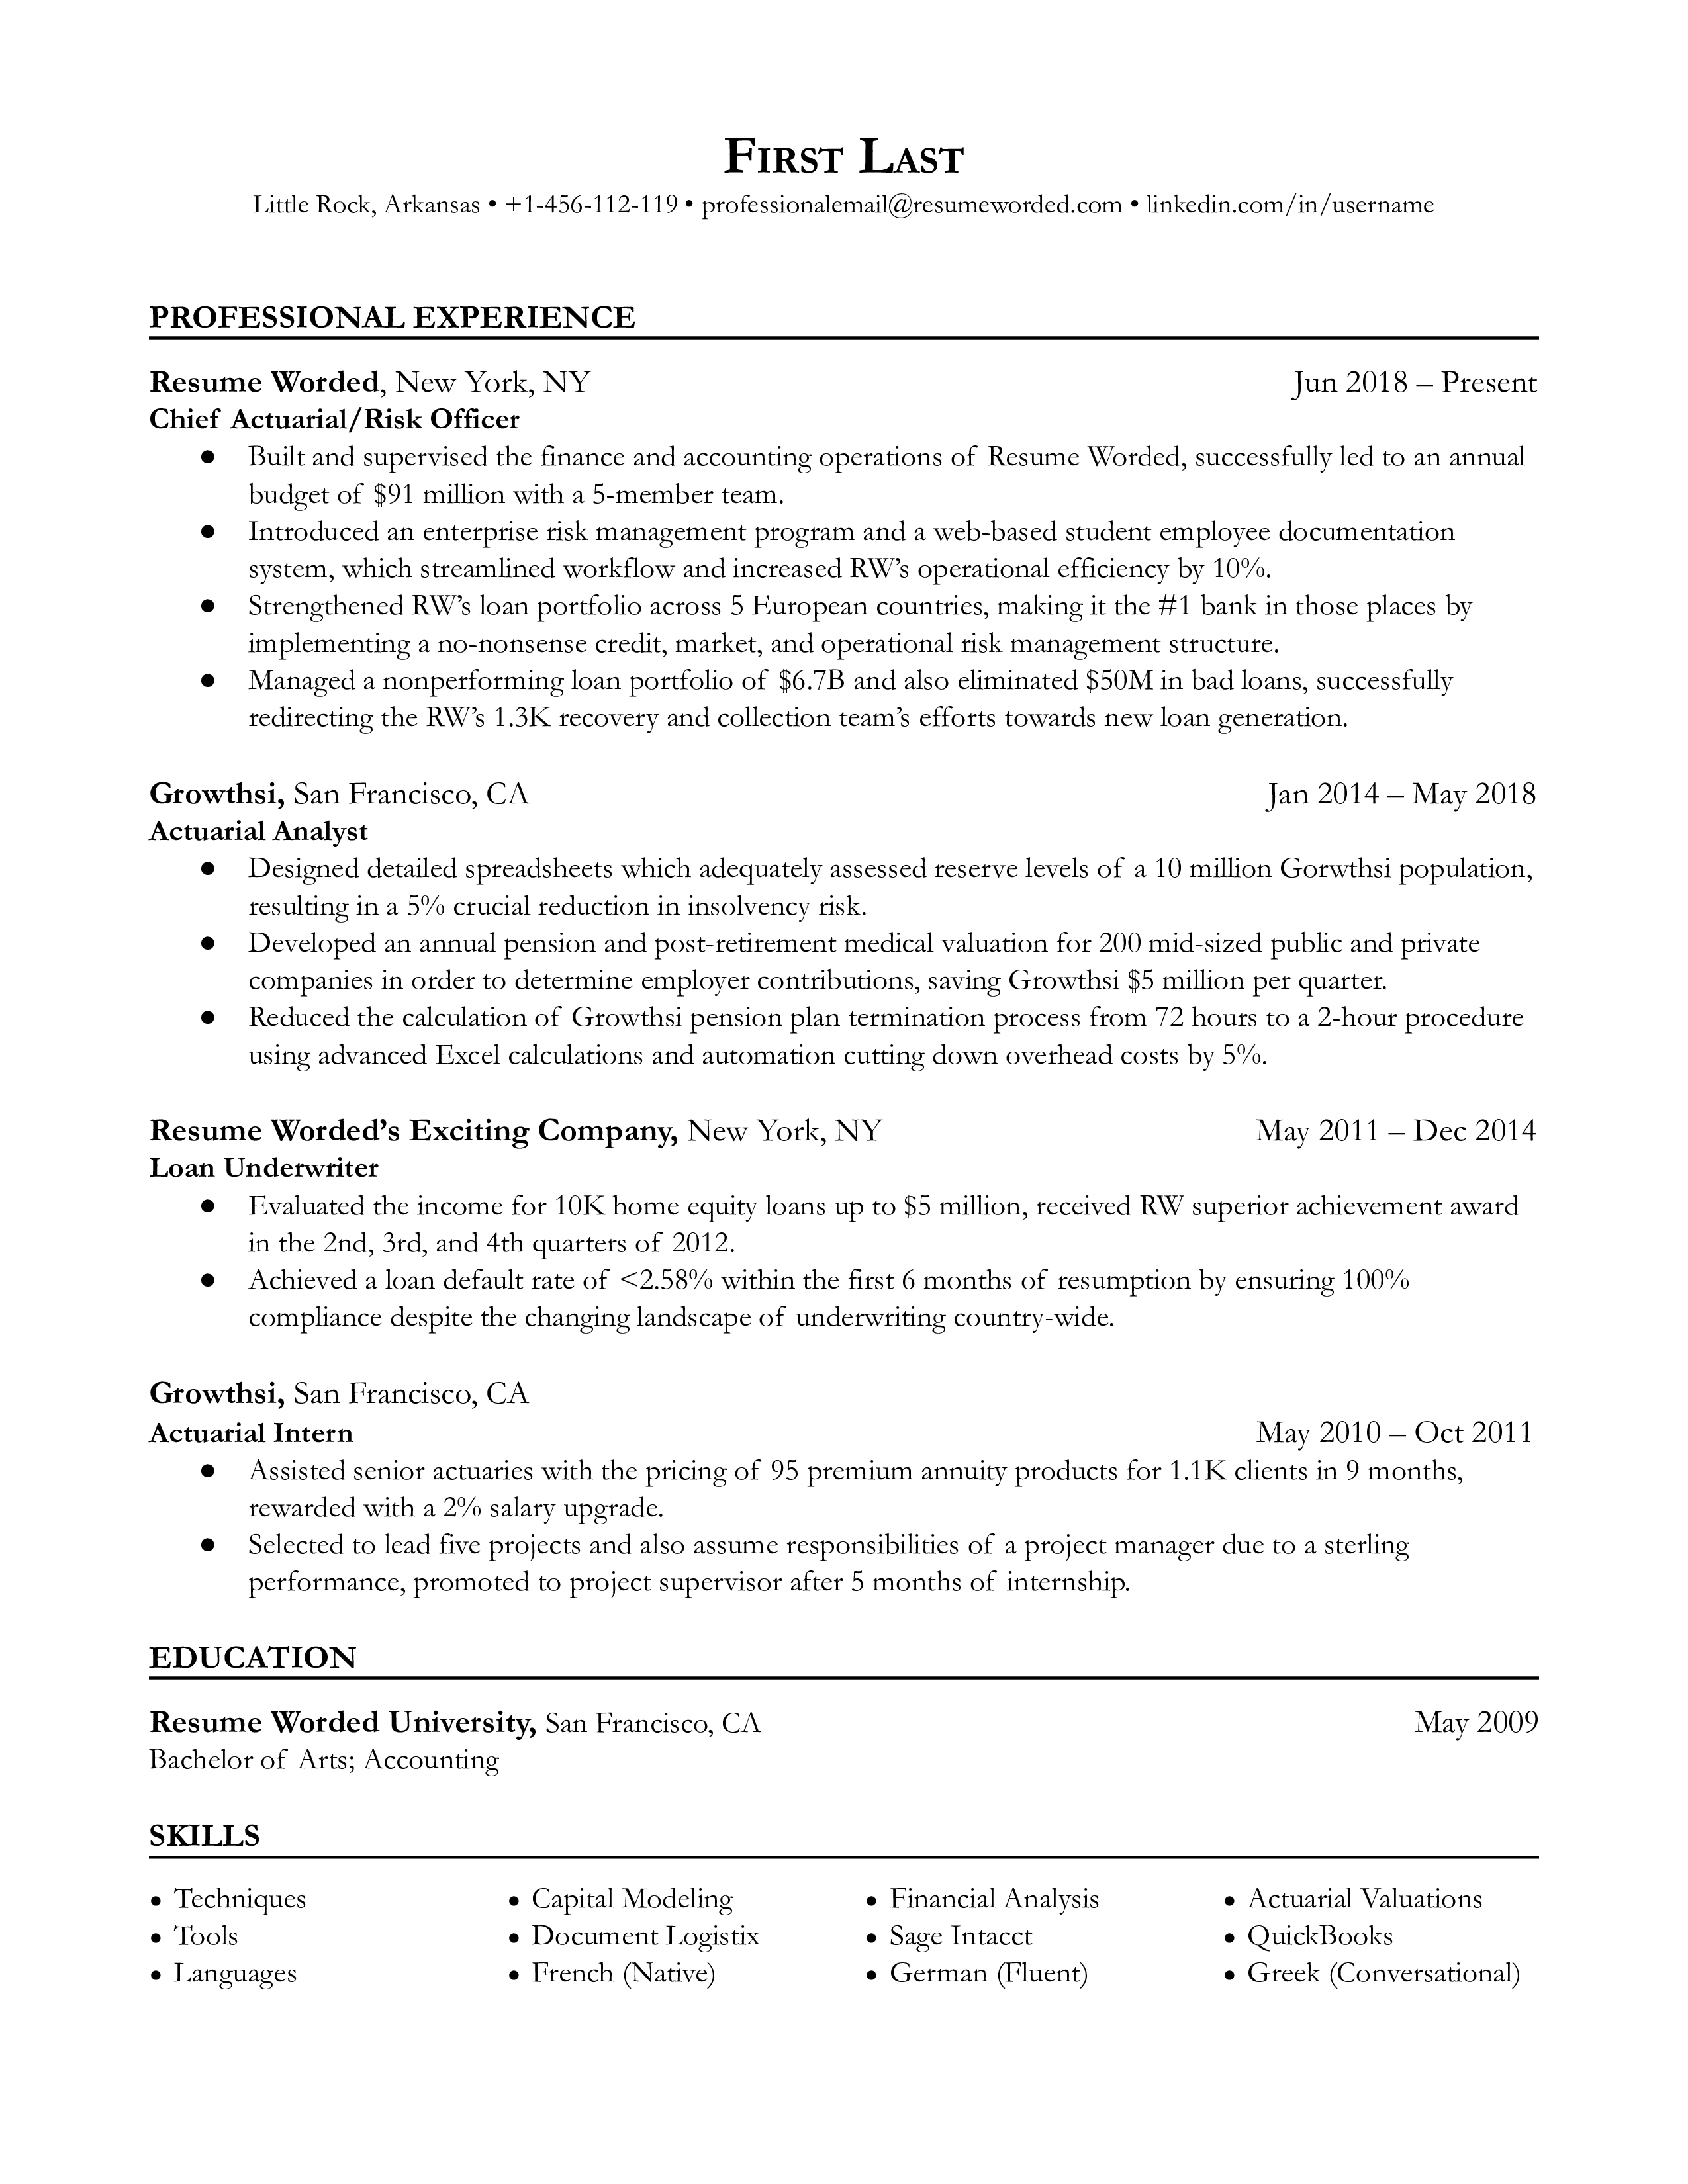 Chief Actuarial/Risk Officer Resume Sample